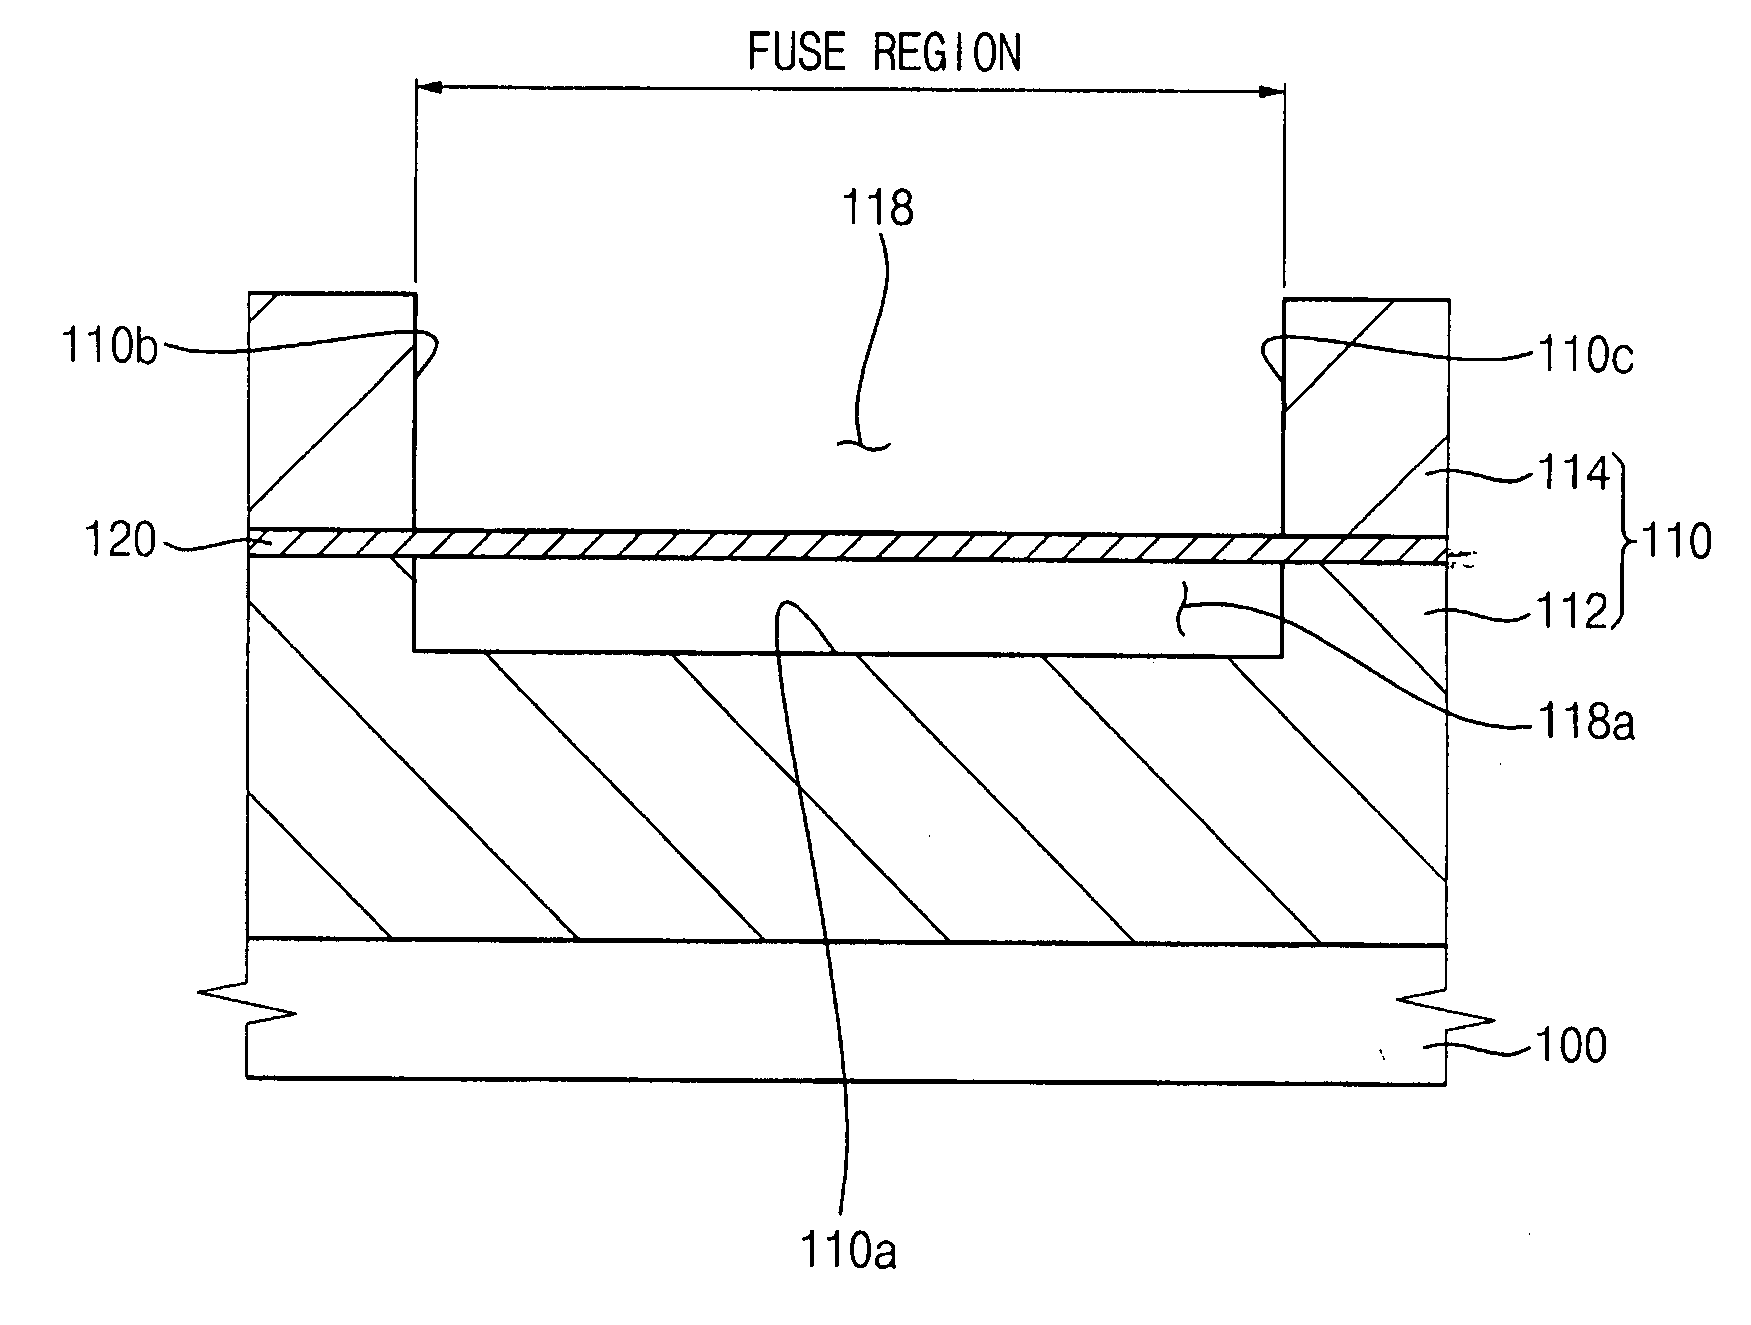 Fuse structure of a semiconductor device and method of manufacturing the same